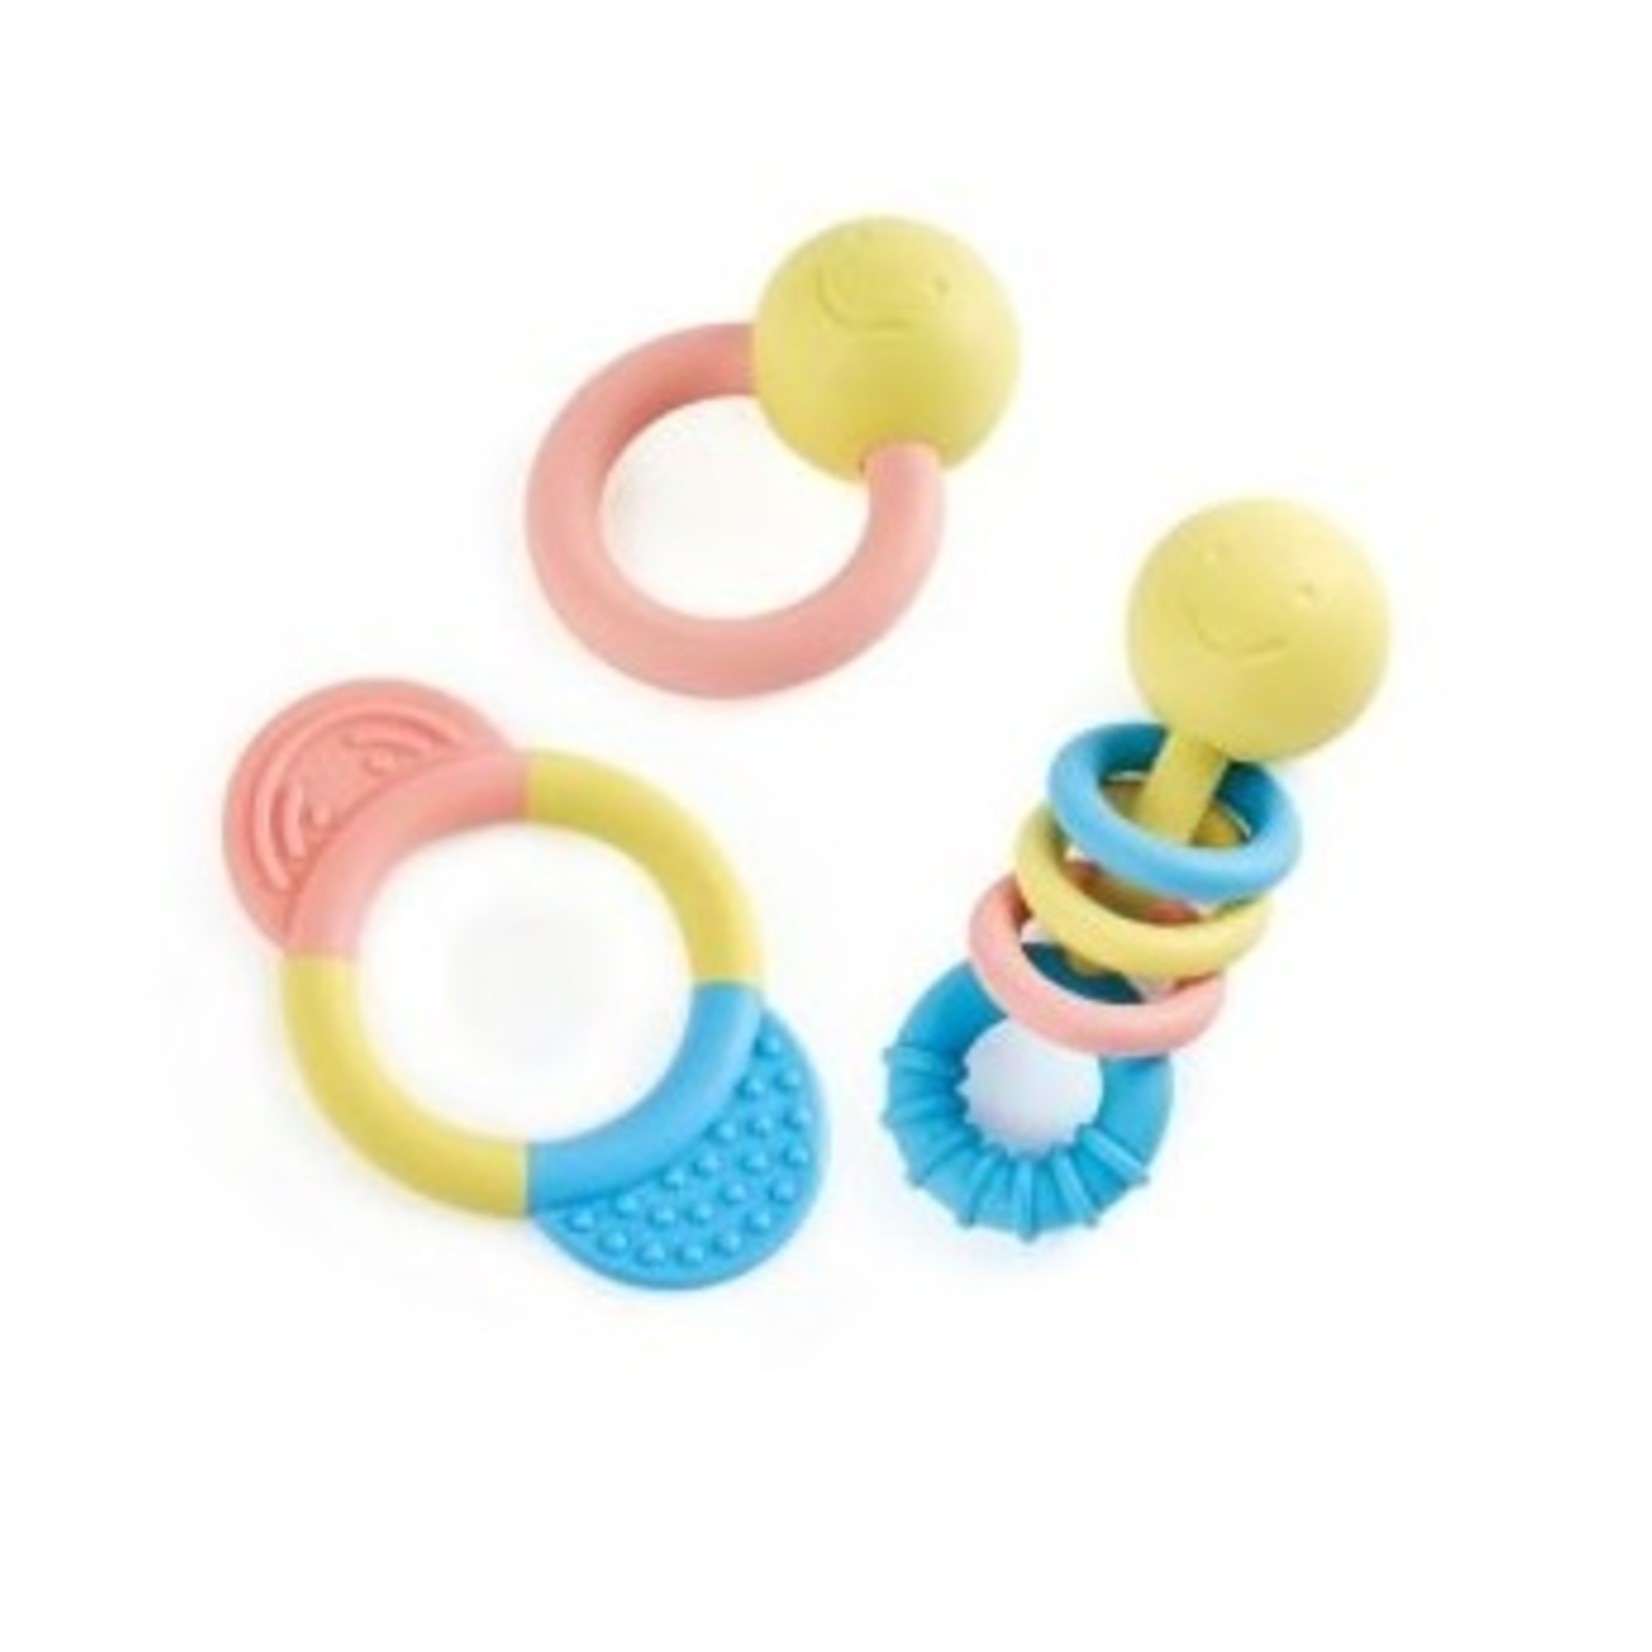 Hape Rattle & teether collection